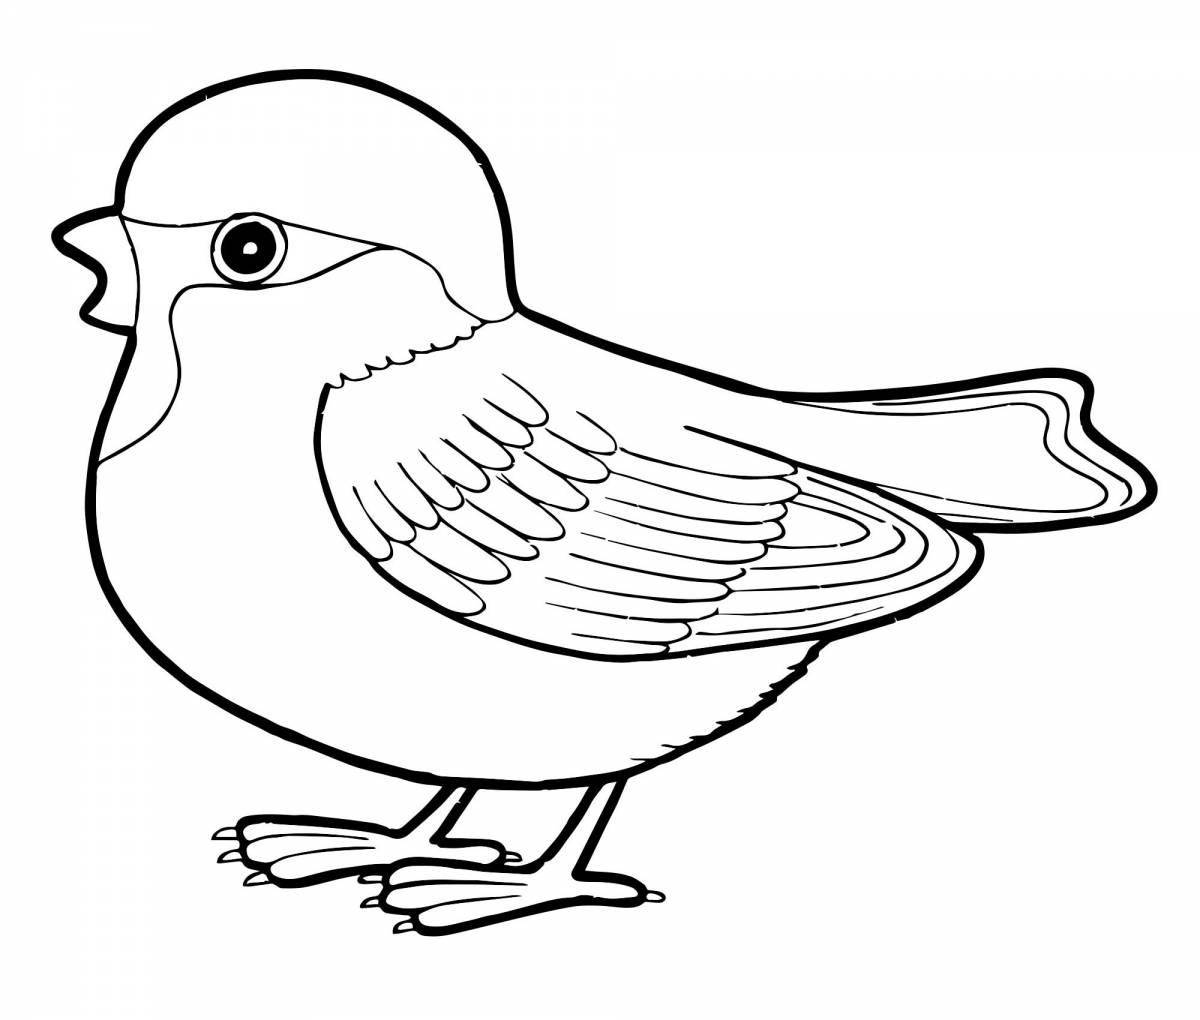 Sweet kids birds coloring page